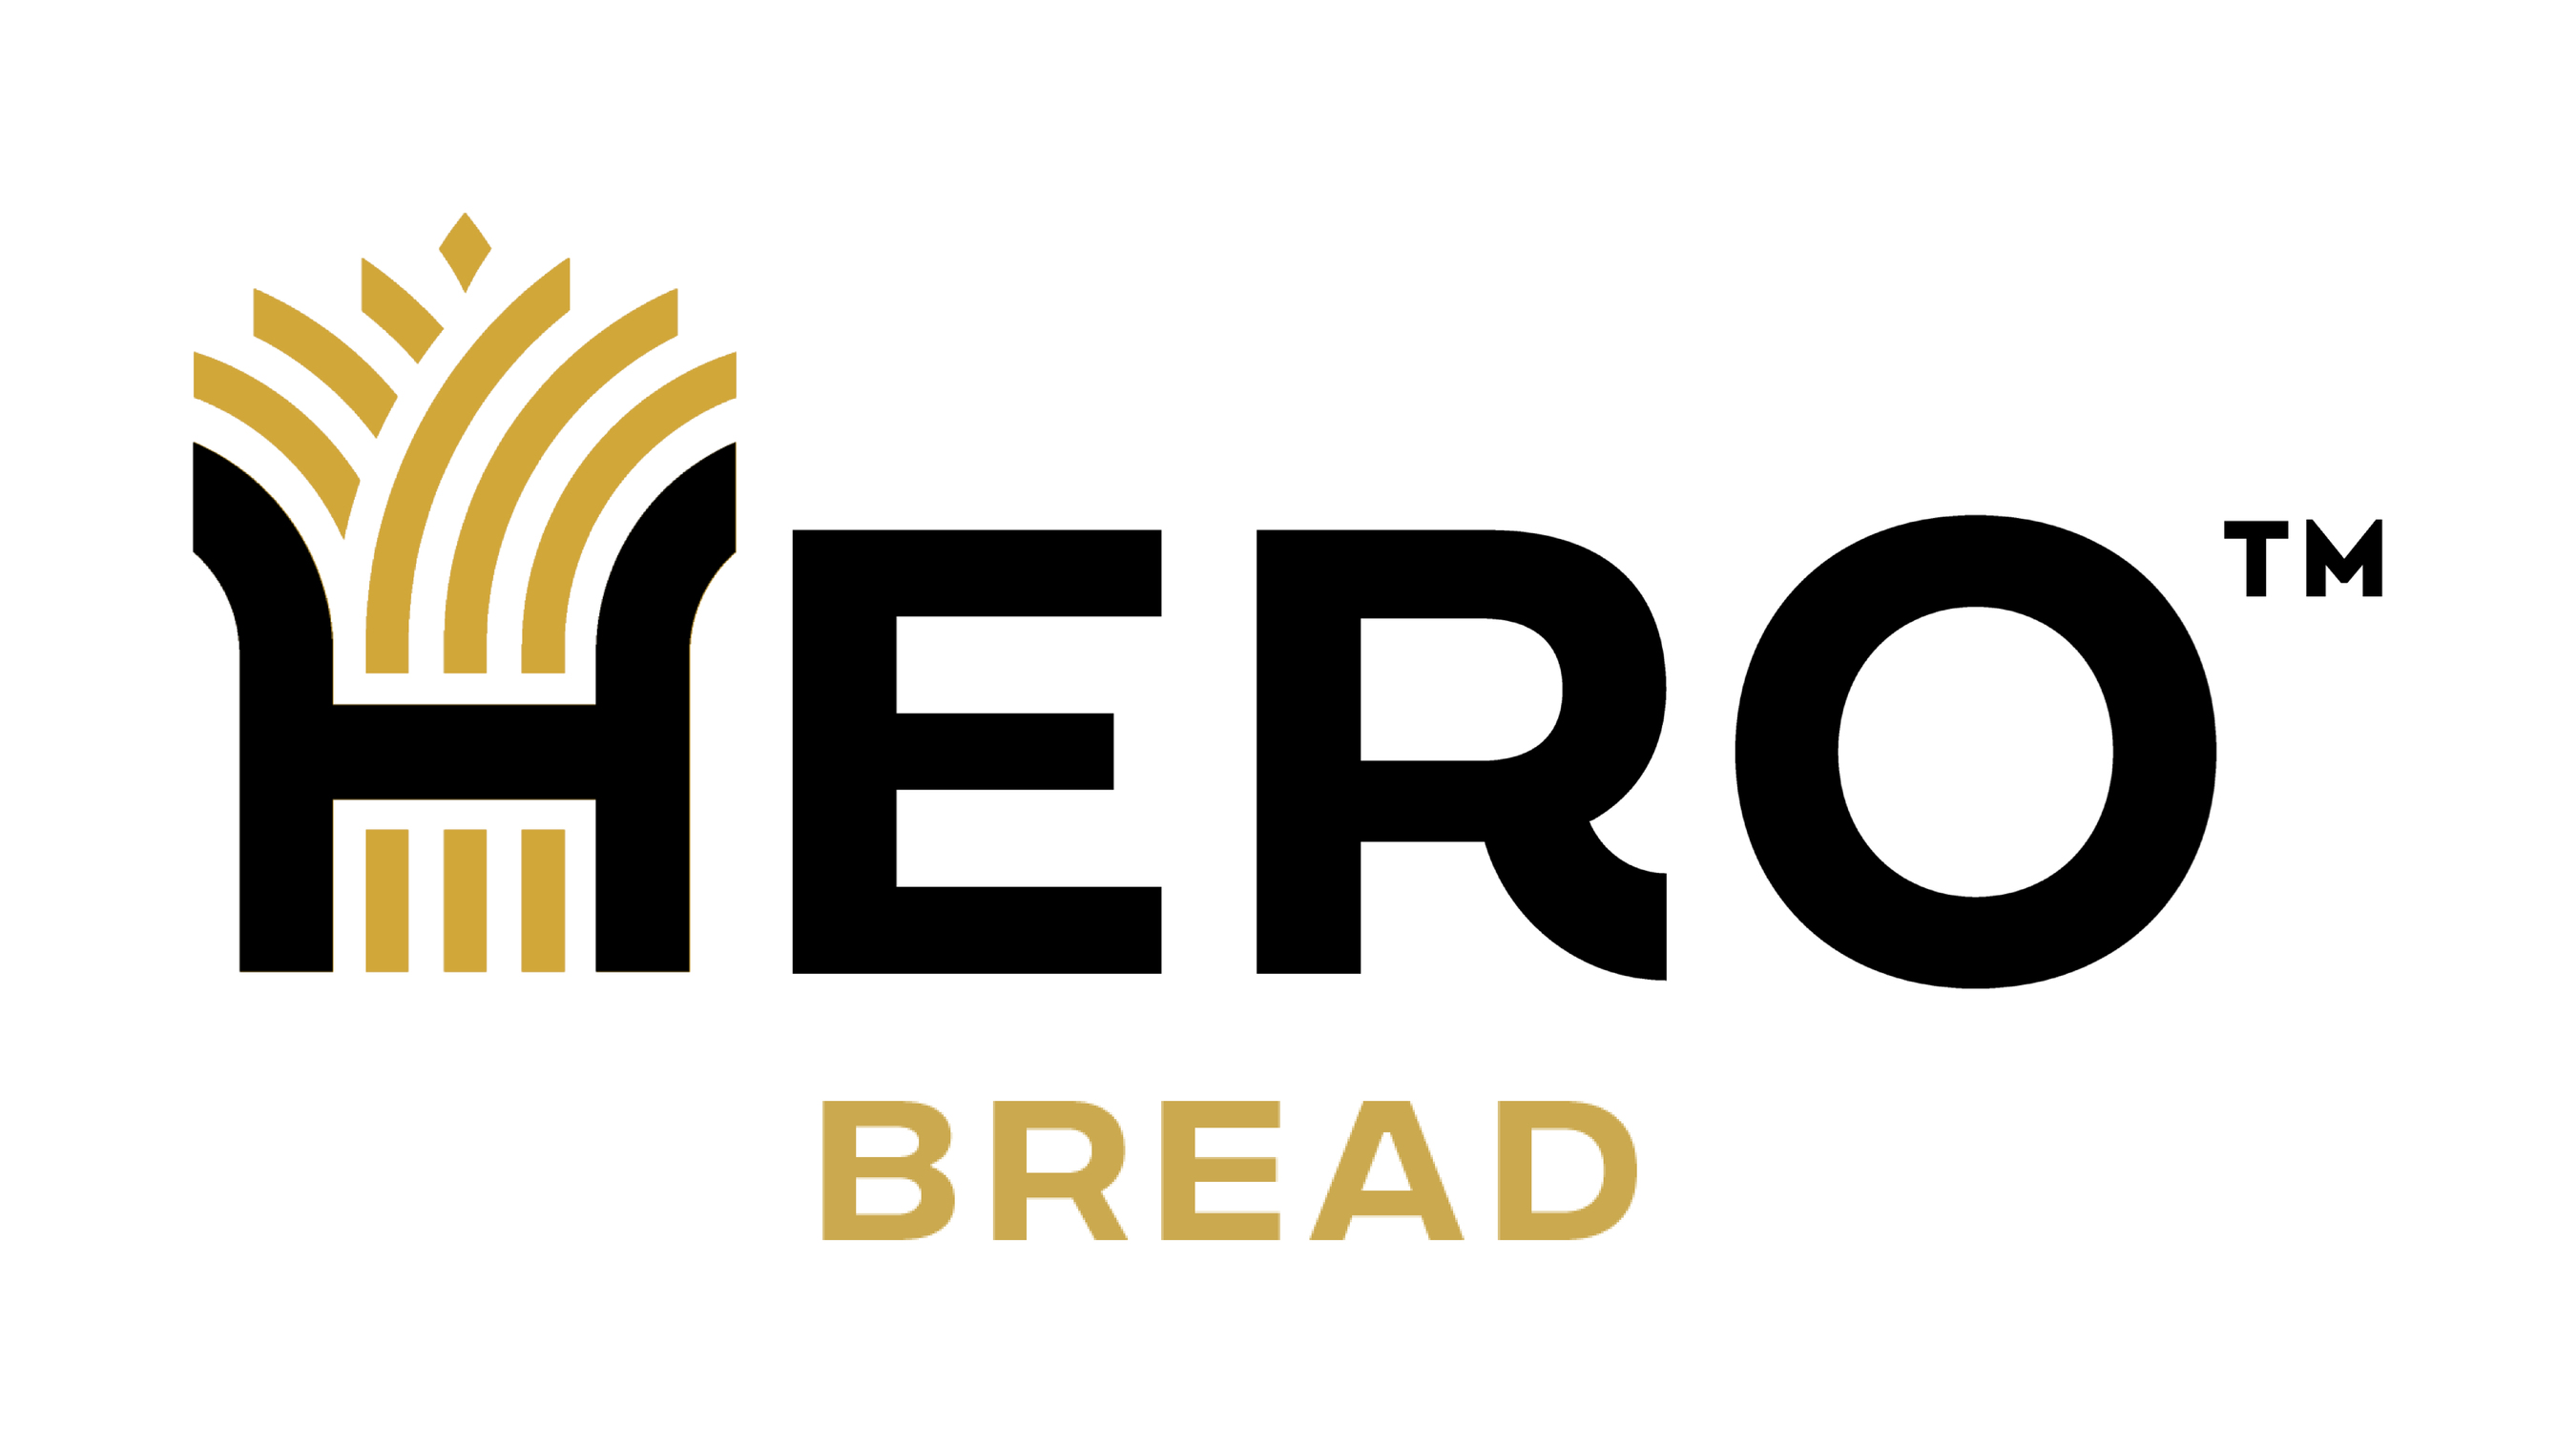 Hero Bread™ is Revolutionizing the Way Consumers Enjoy Sandwiches Now